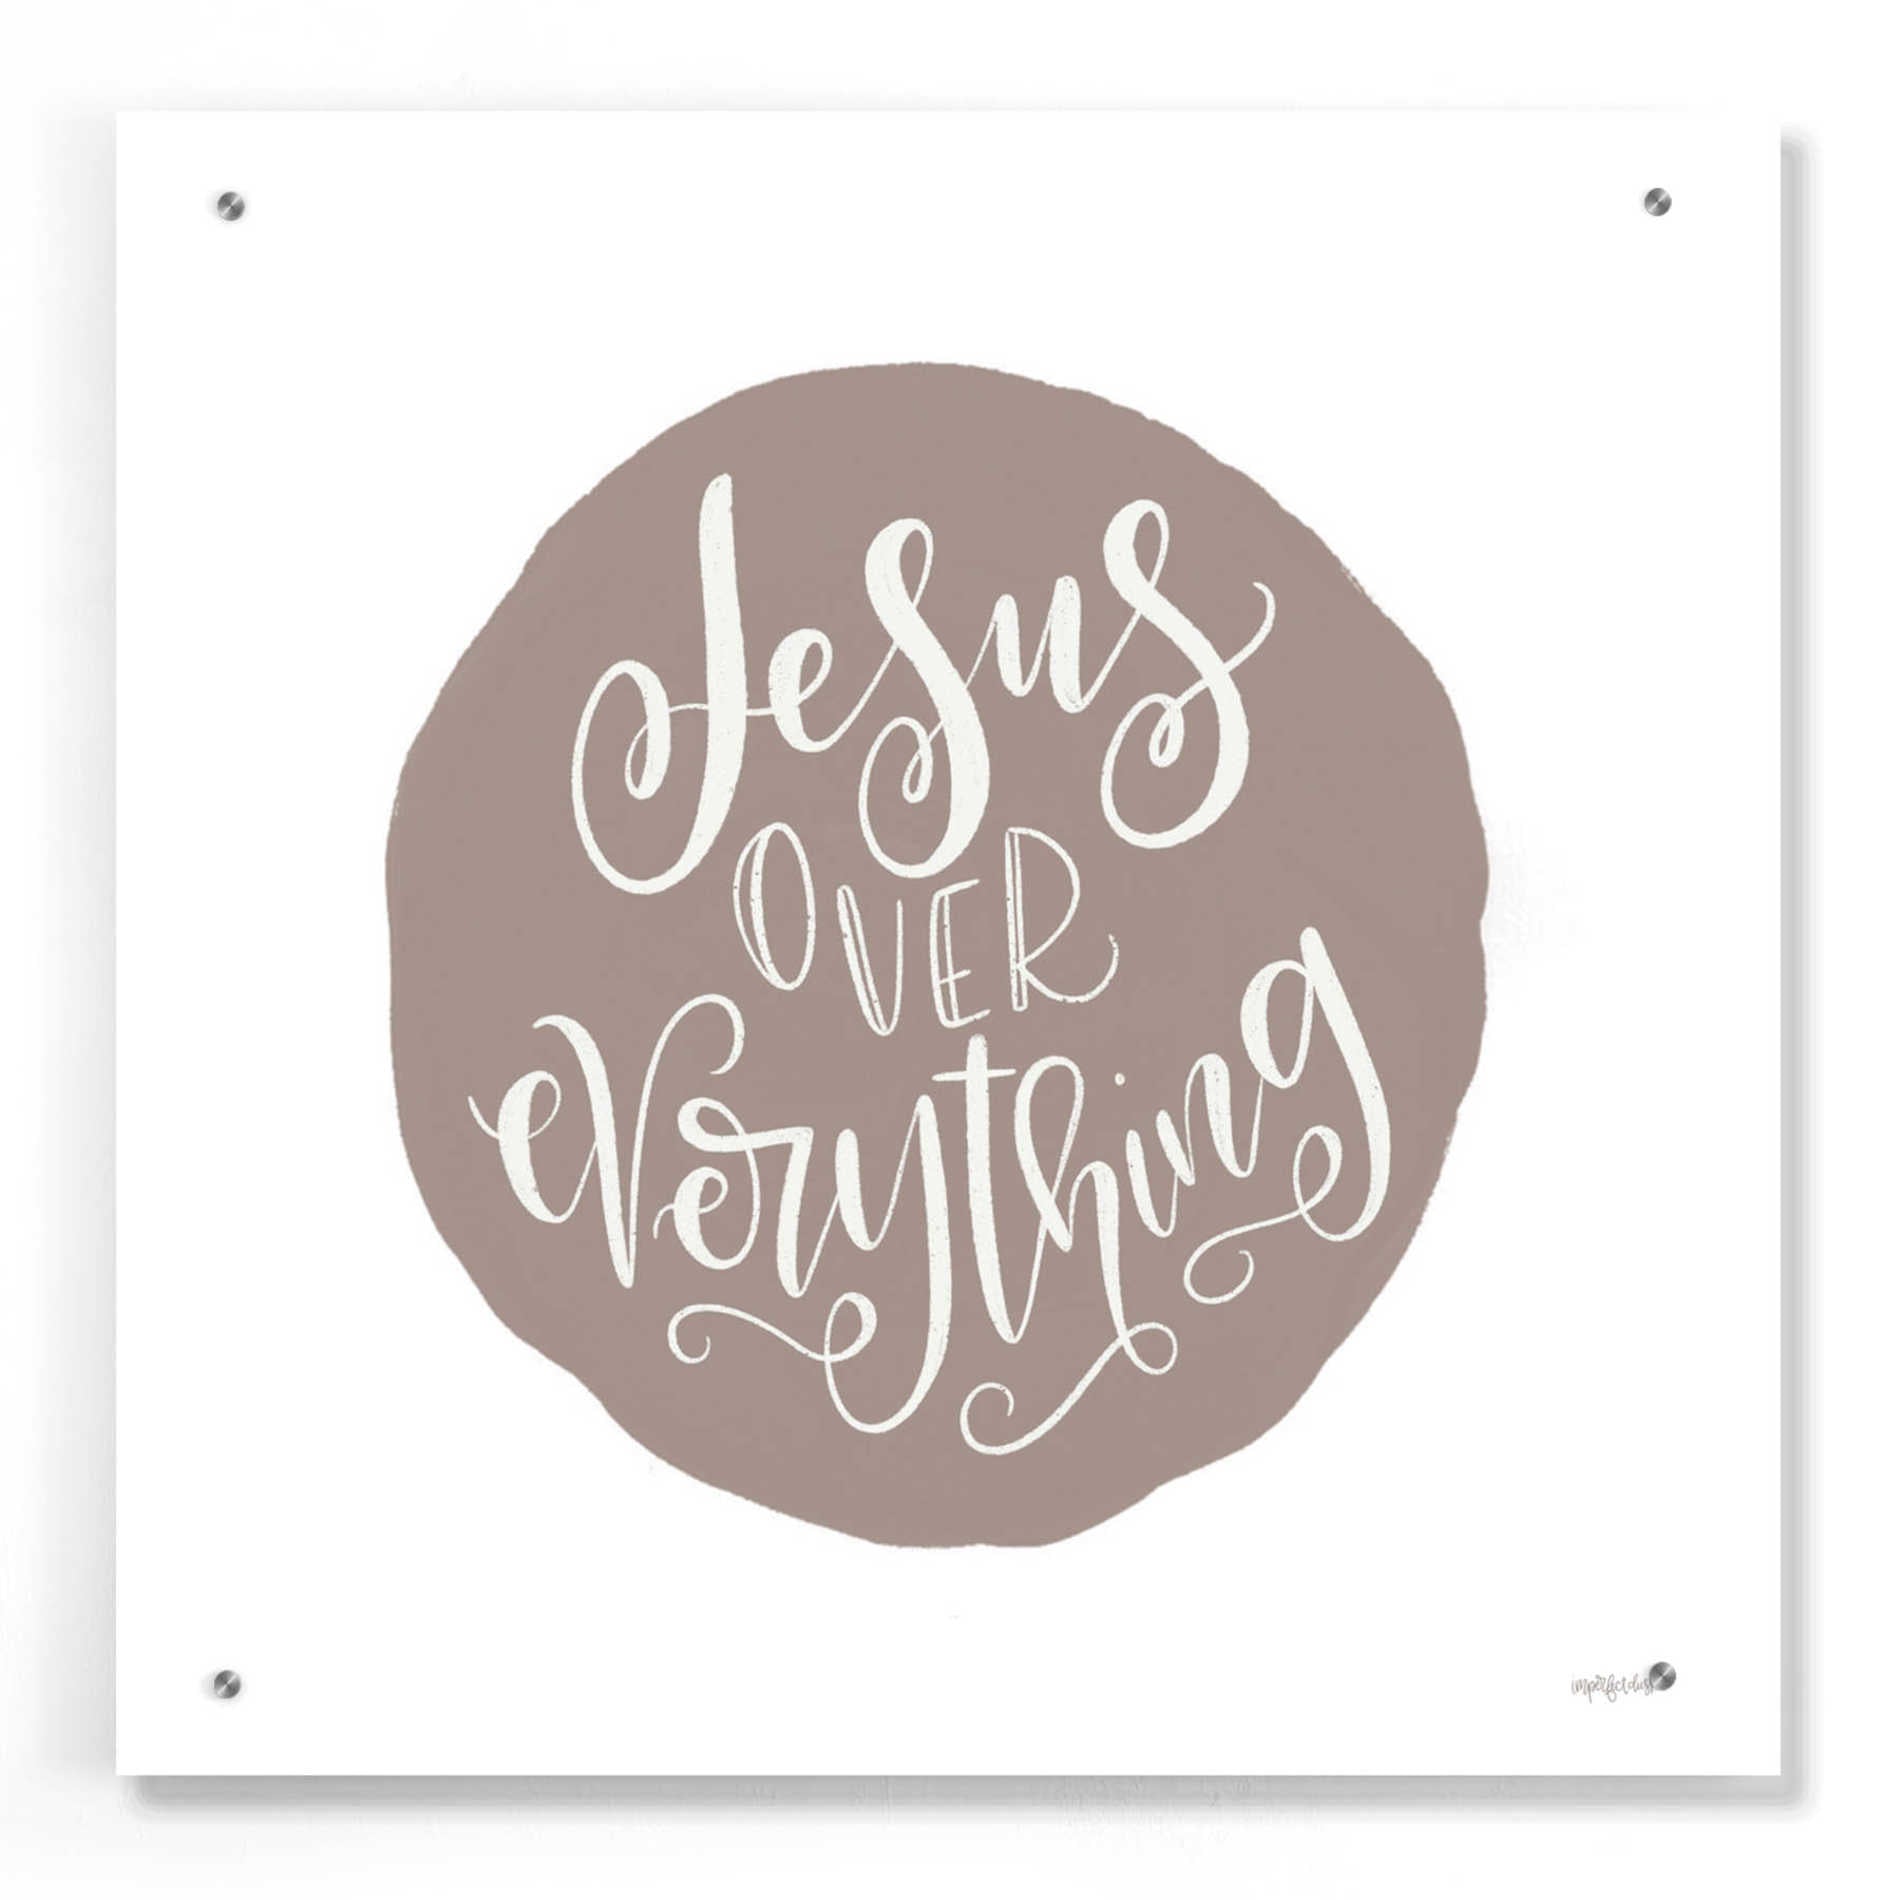 Epic Art 'Jesus Over Everything' by Imperfect Dust, Acrylic Glass Wall Art,24x24